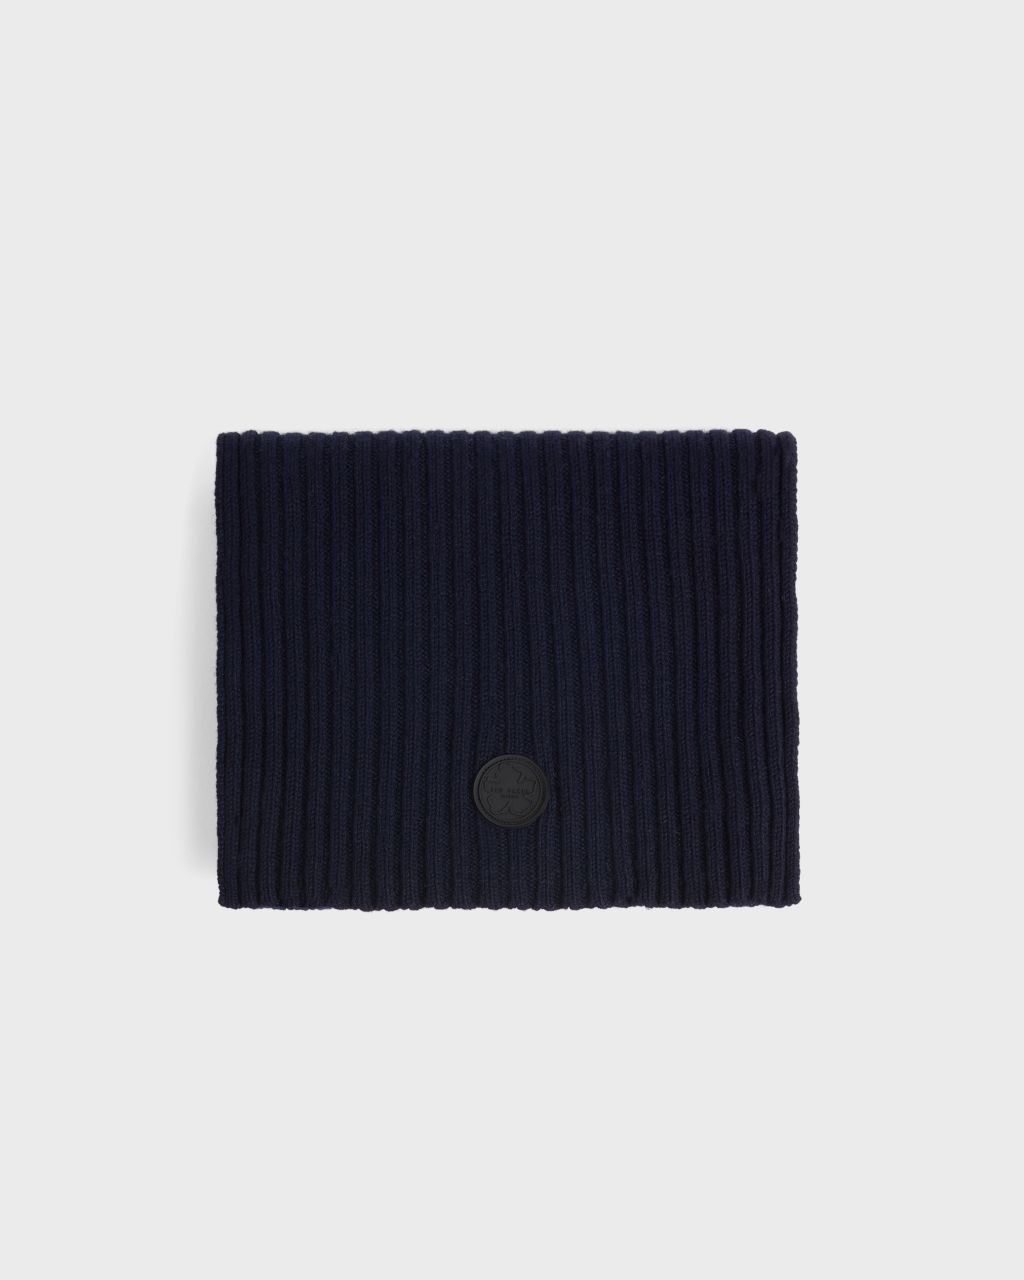 Ted Baker Men's Cardigan Stitch Scarf in Navy, Camen